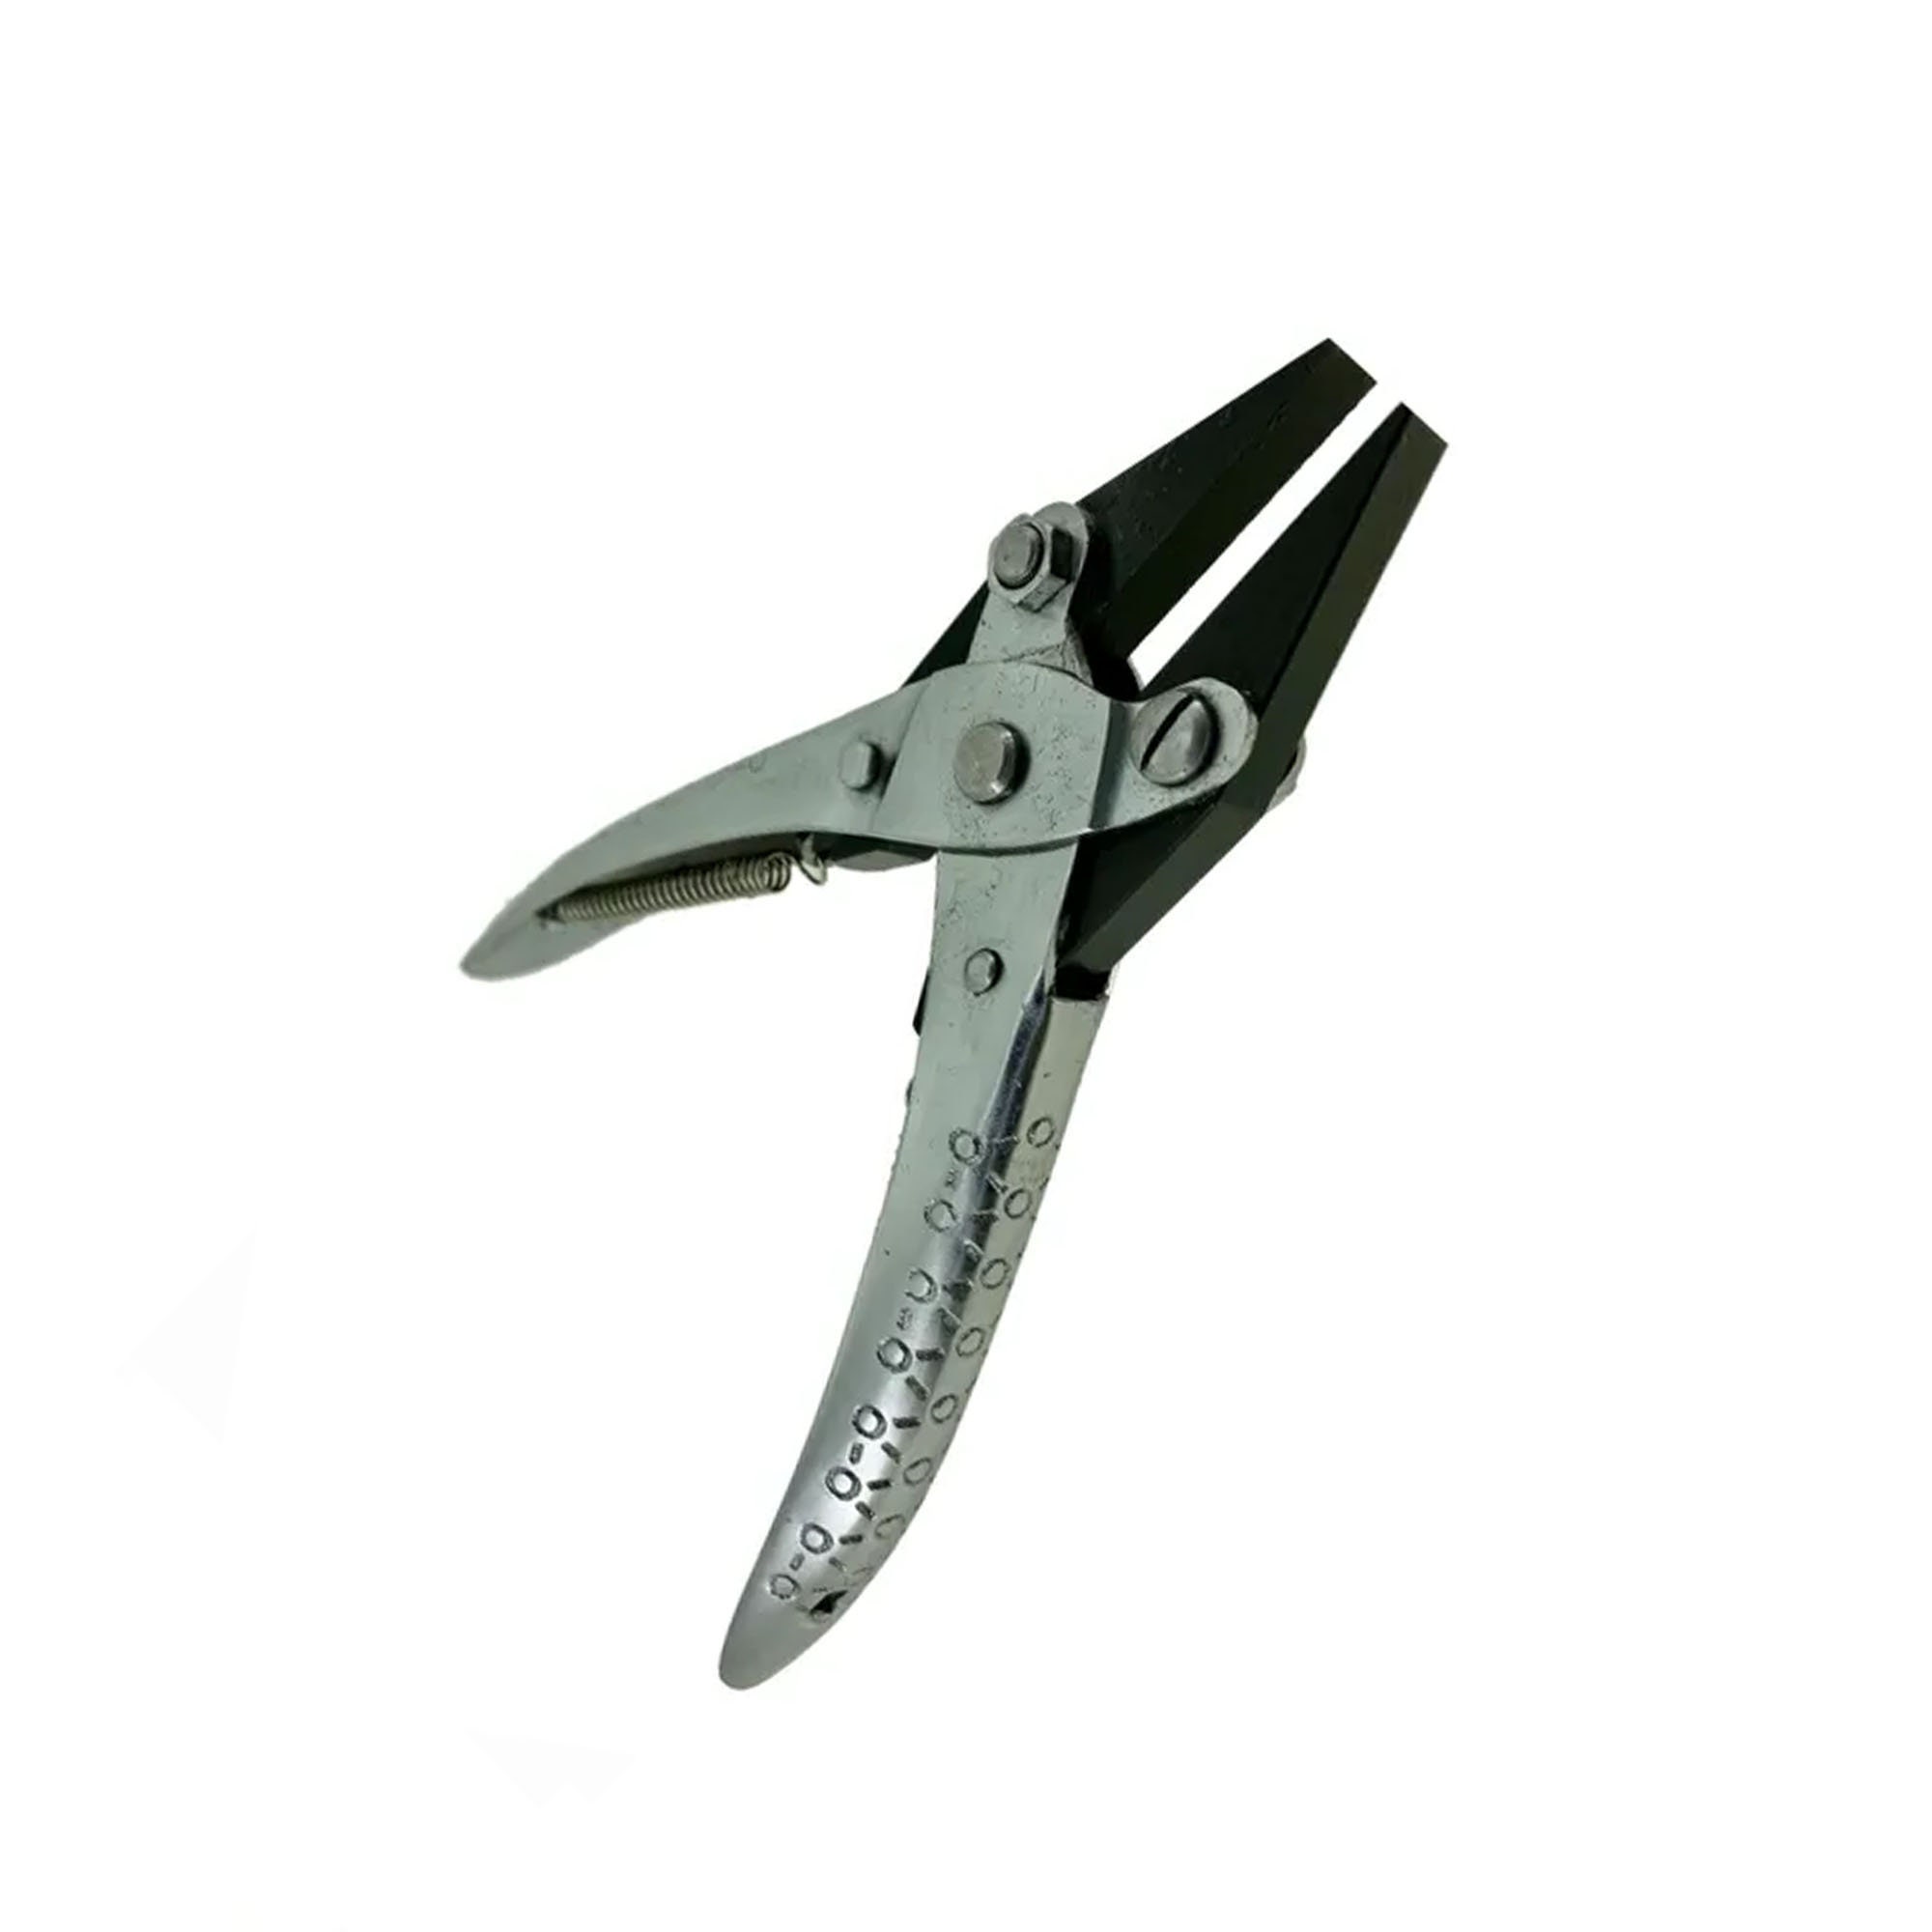 94mm Precision Mini Wire Snip Cutters For Gripping Splicing Cutting Wires  Stripping Insulation Craft Electrical Electronic Model Making Tool